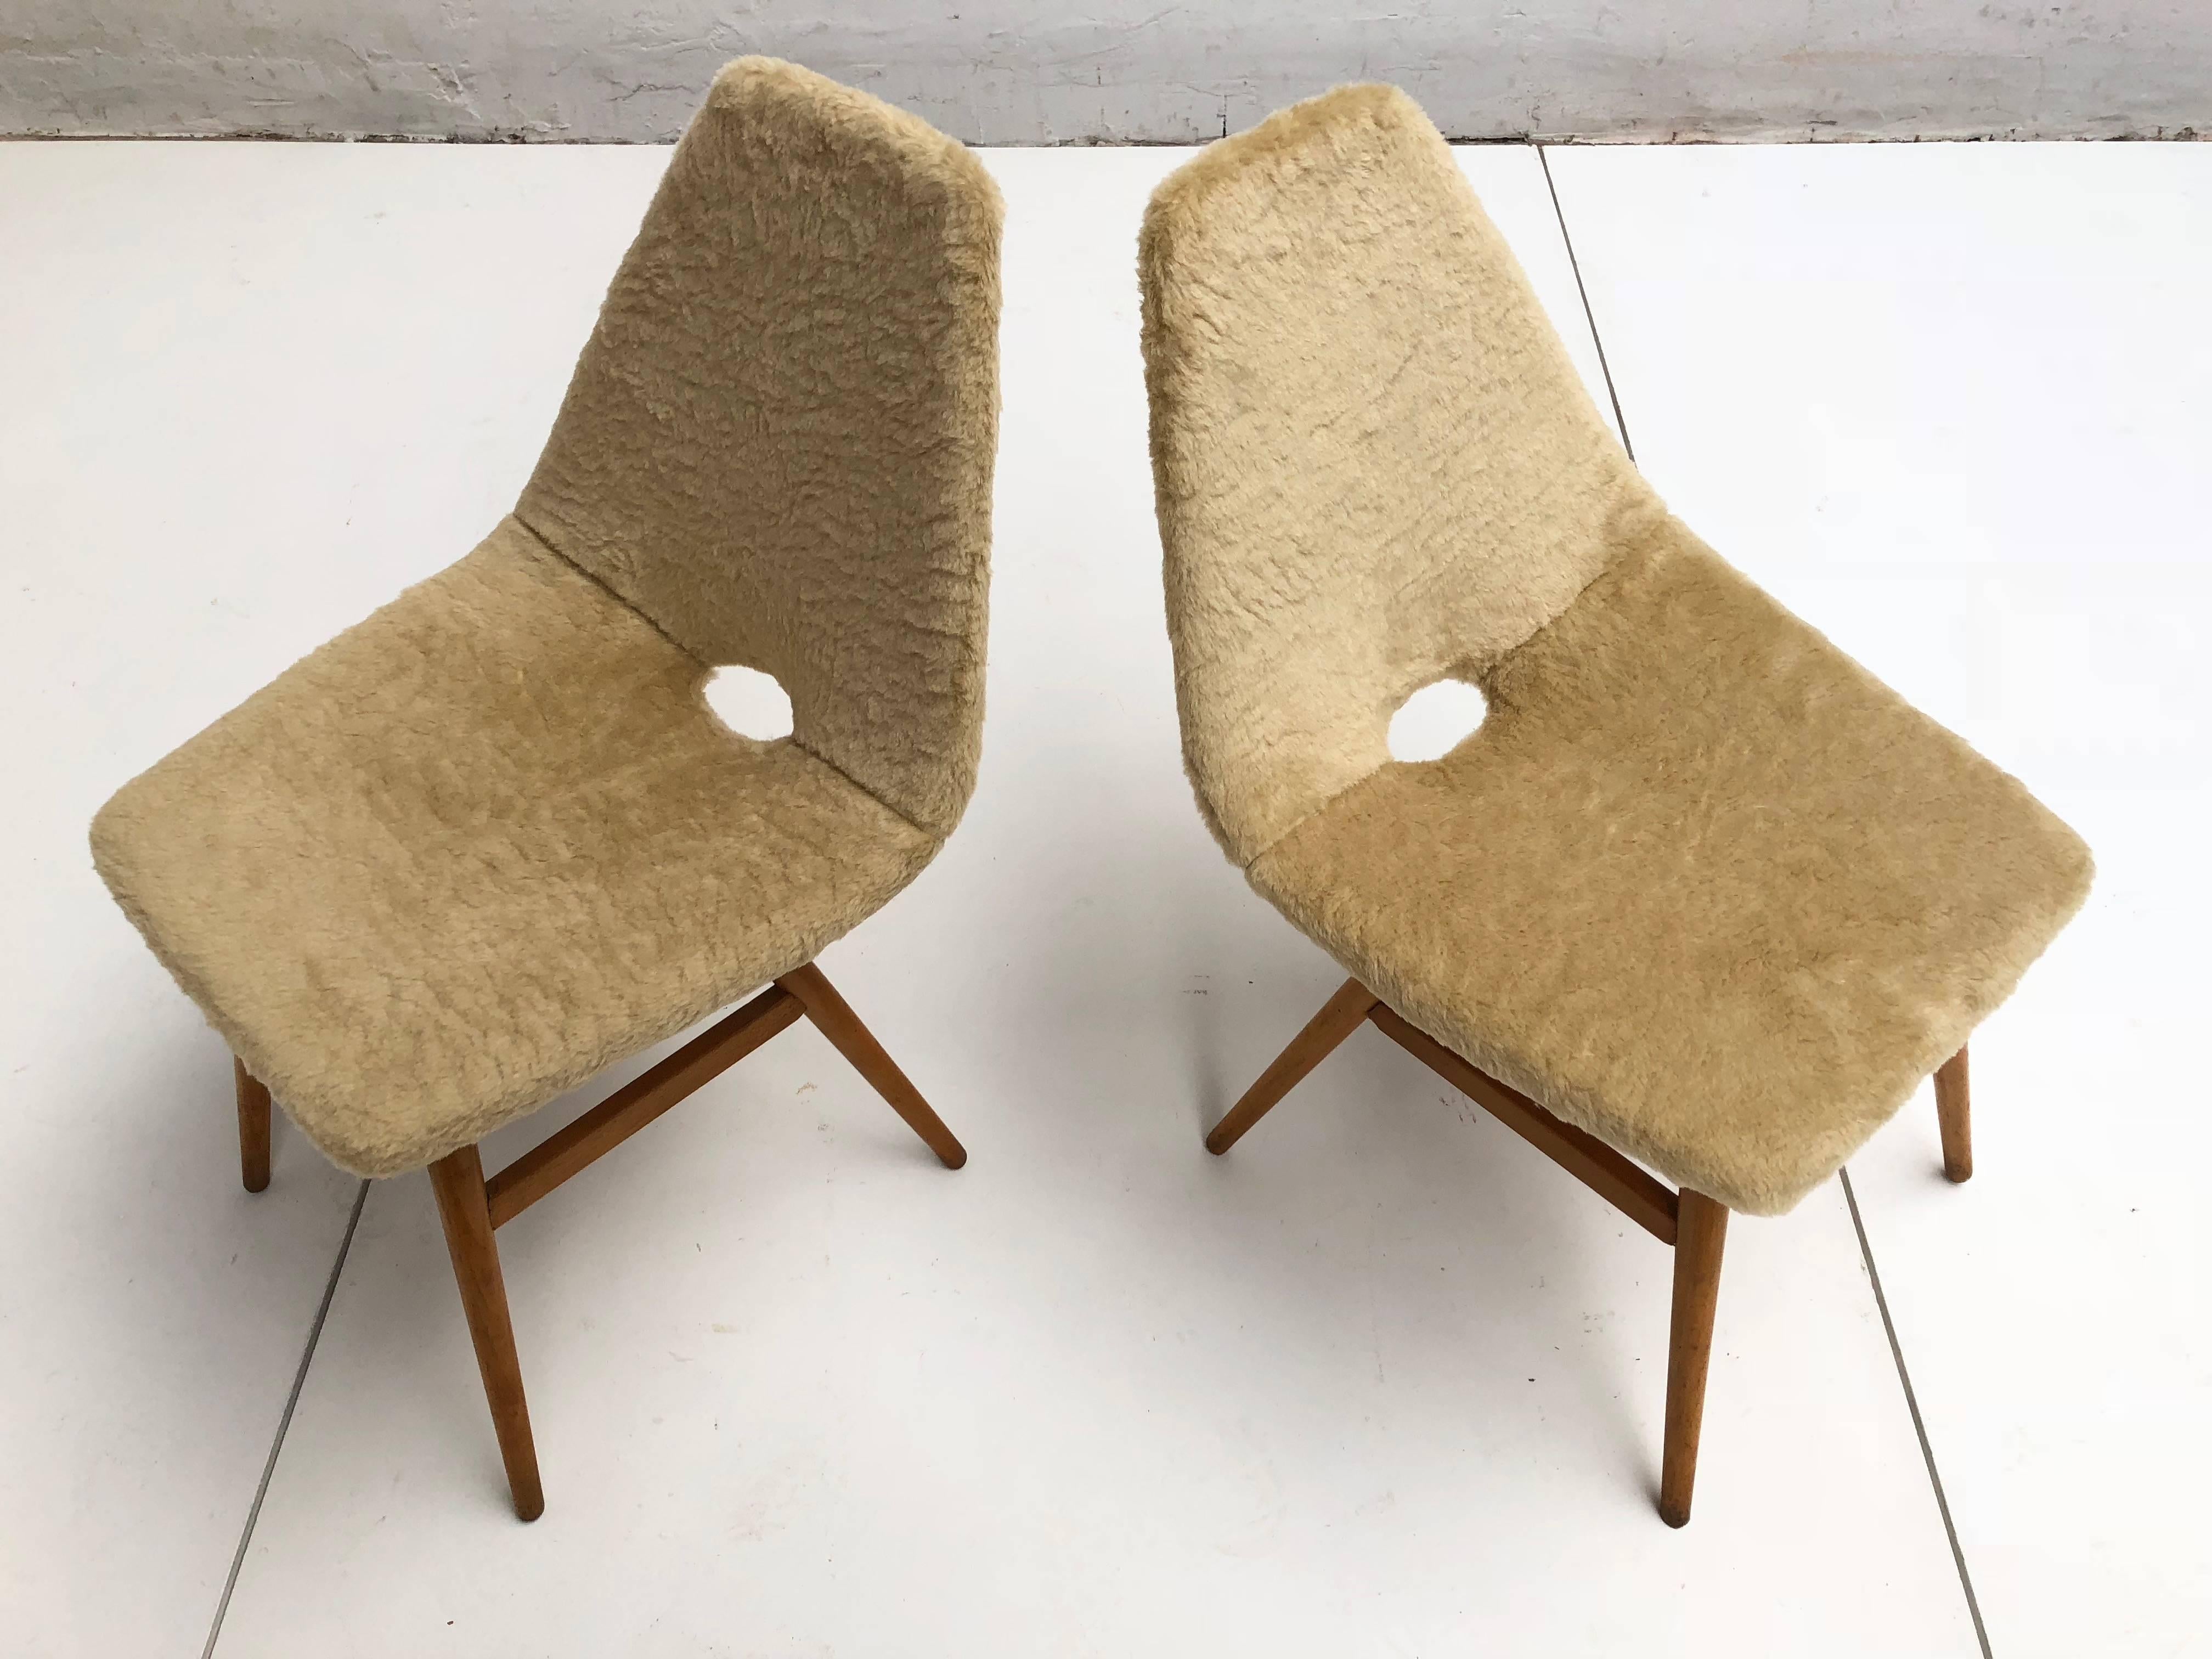 Pair of side chairs by Judit Burian & Erika Szek made in Hungary, circa 1959

Very much inspired by the works of Italian (Augusto Bozzi, Vittorio Nobili) and French (Pierre Guariche) contemporary designers of that era

A very elegant and